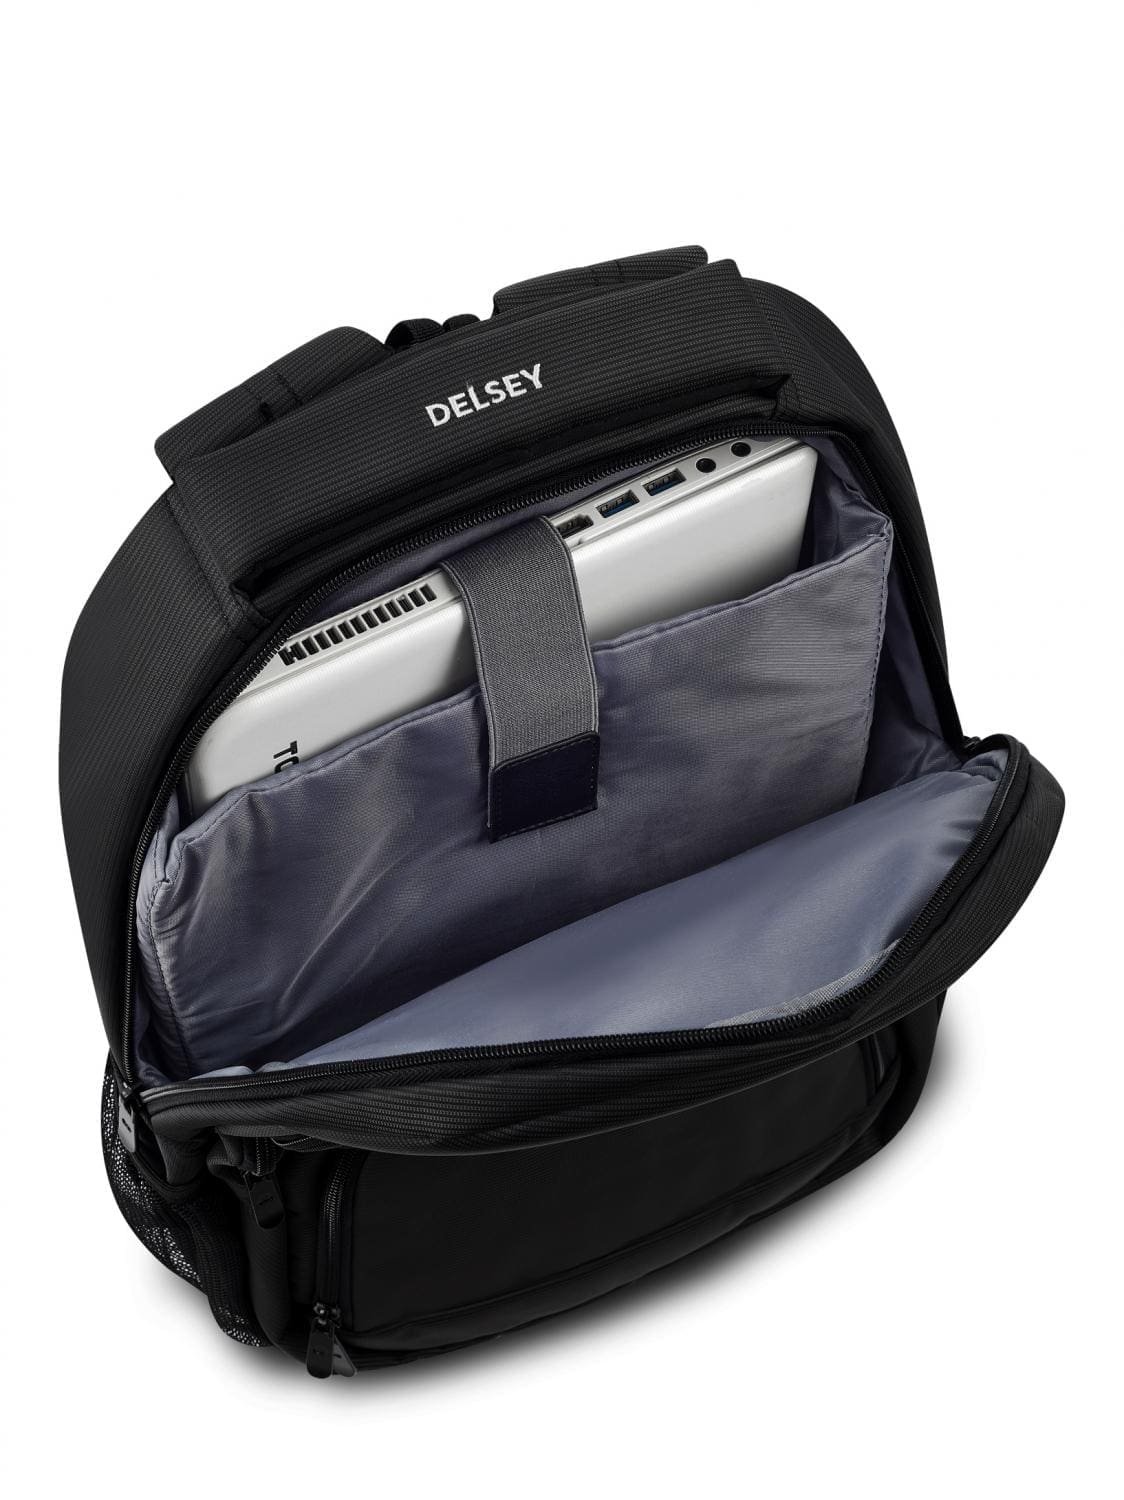 delsey-element-aviator-backpack-with-two-compartments-15-6-pc-holder-black-3219110506884.jpg